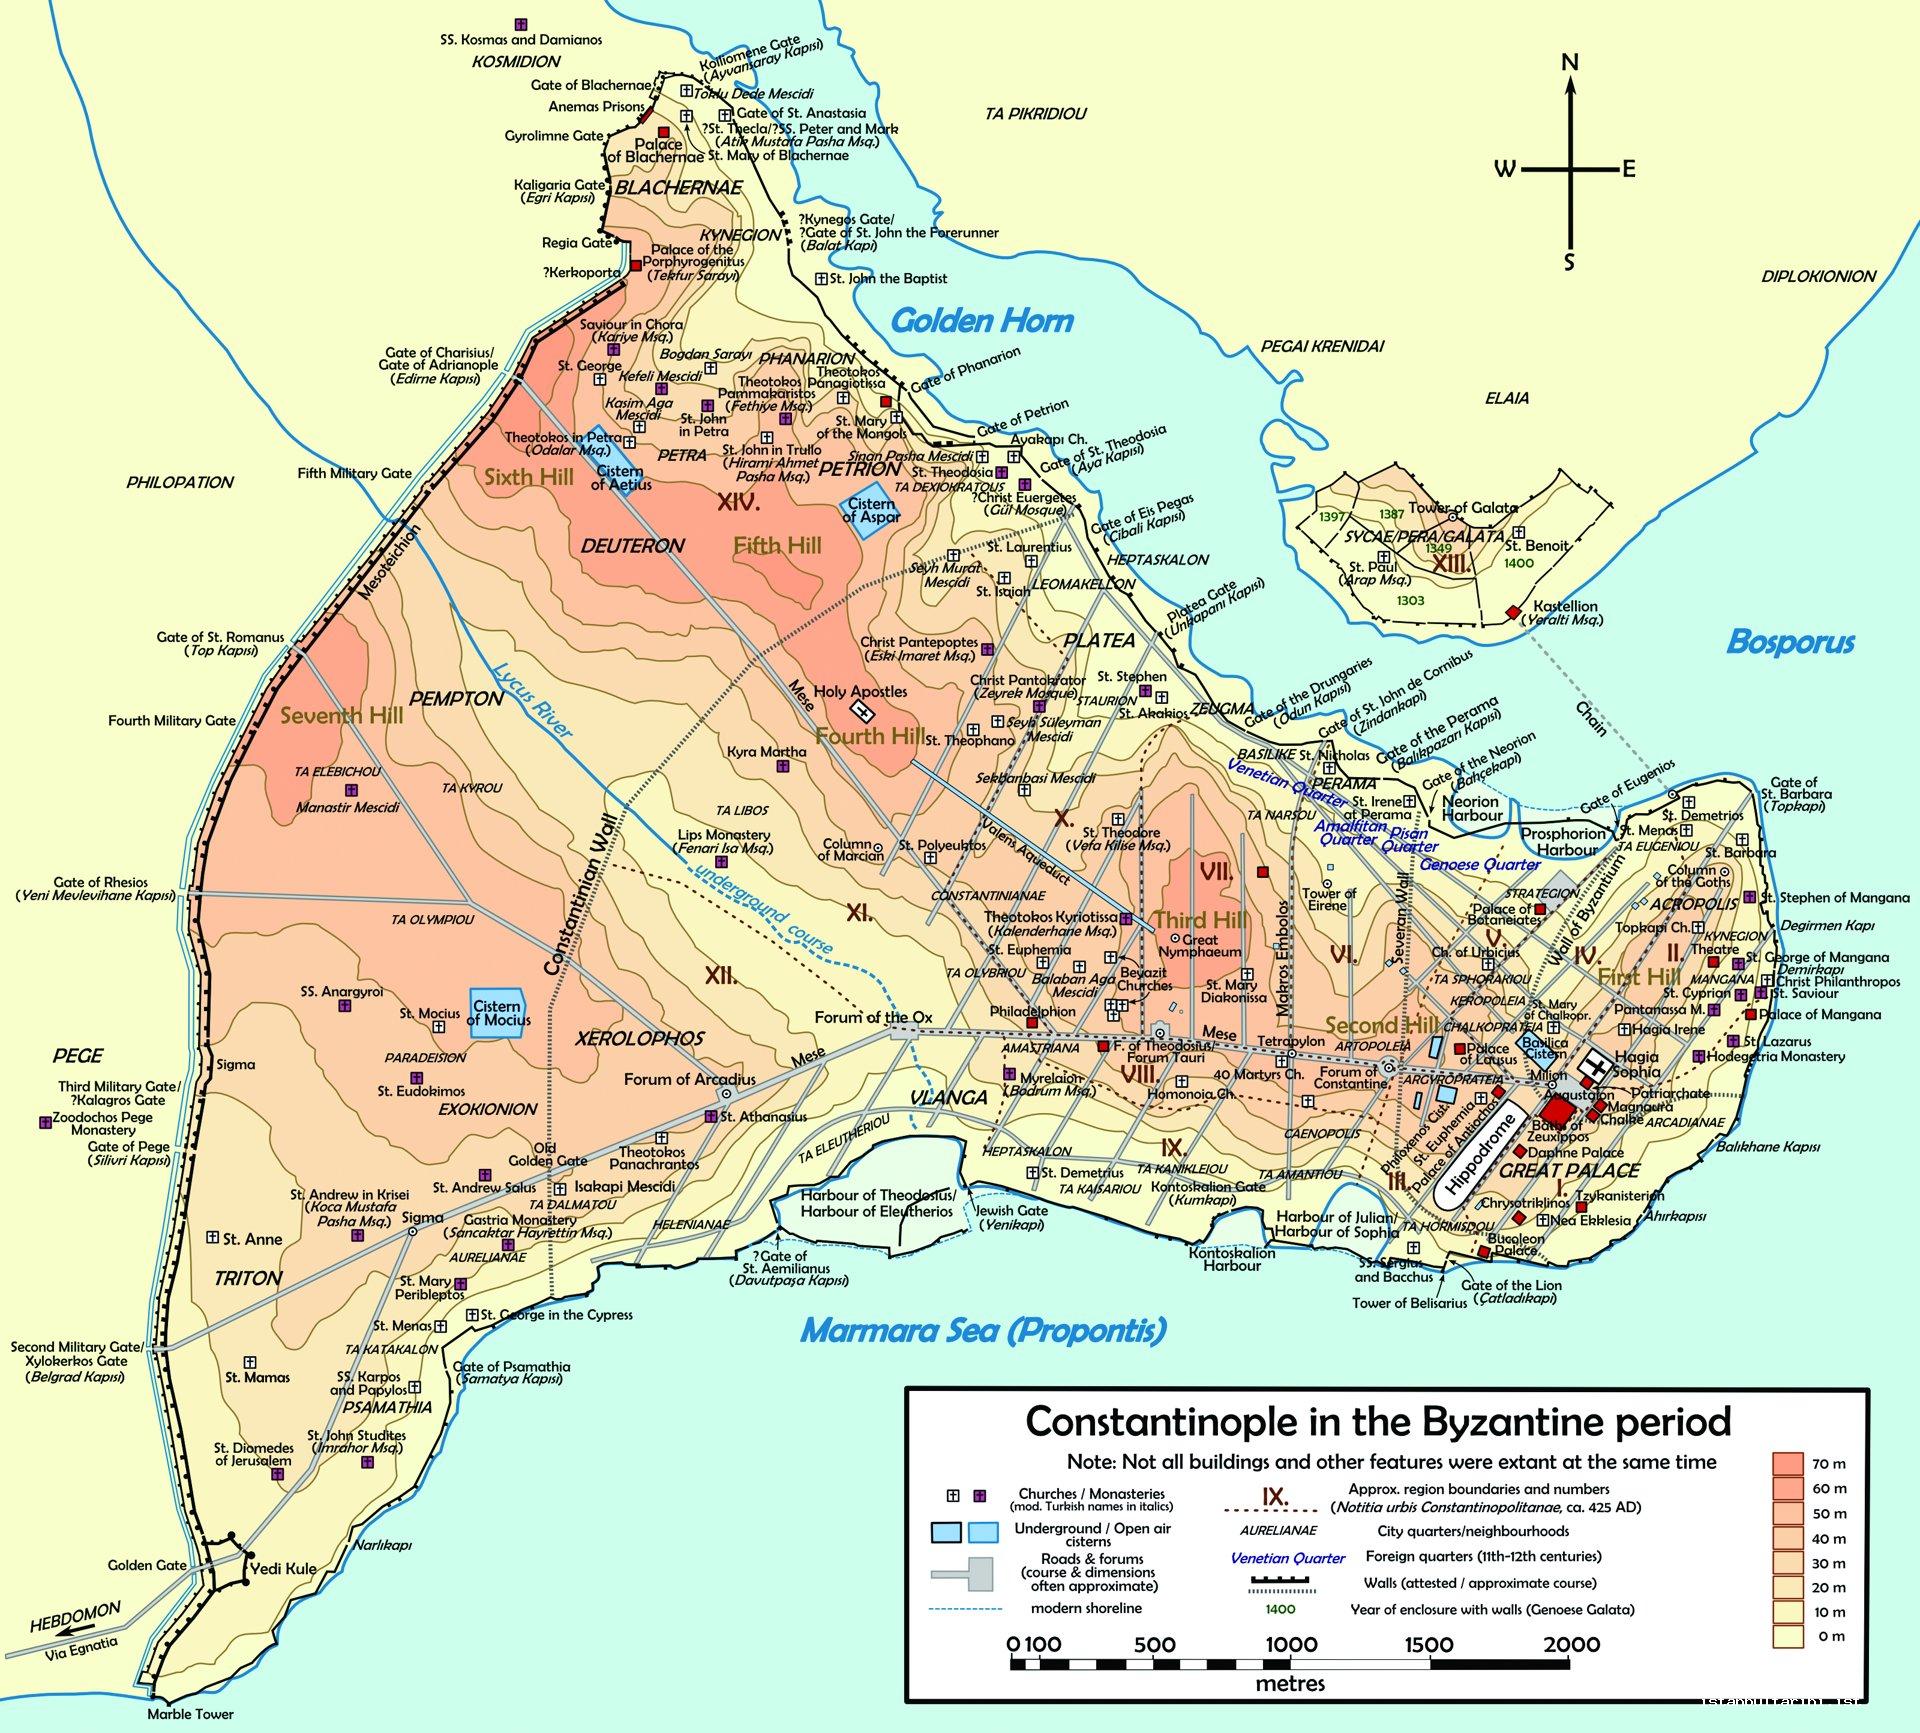 8- Constantinople in the Byzantine period